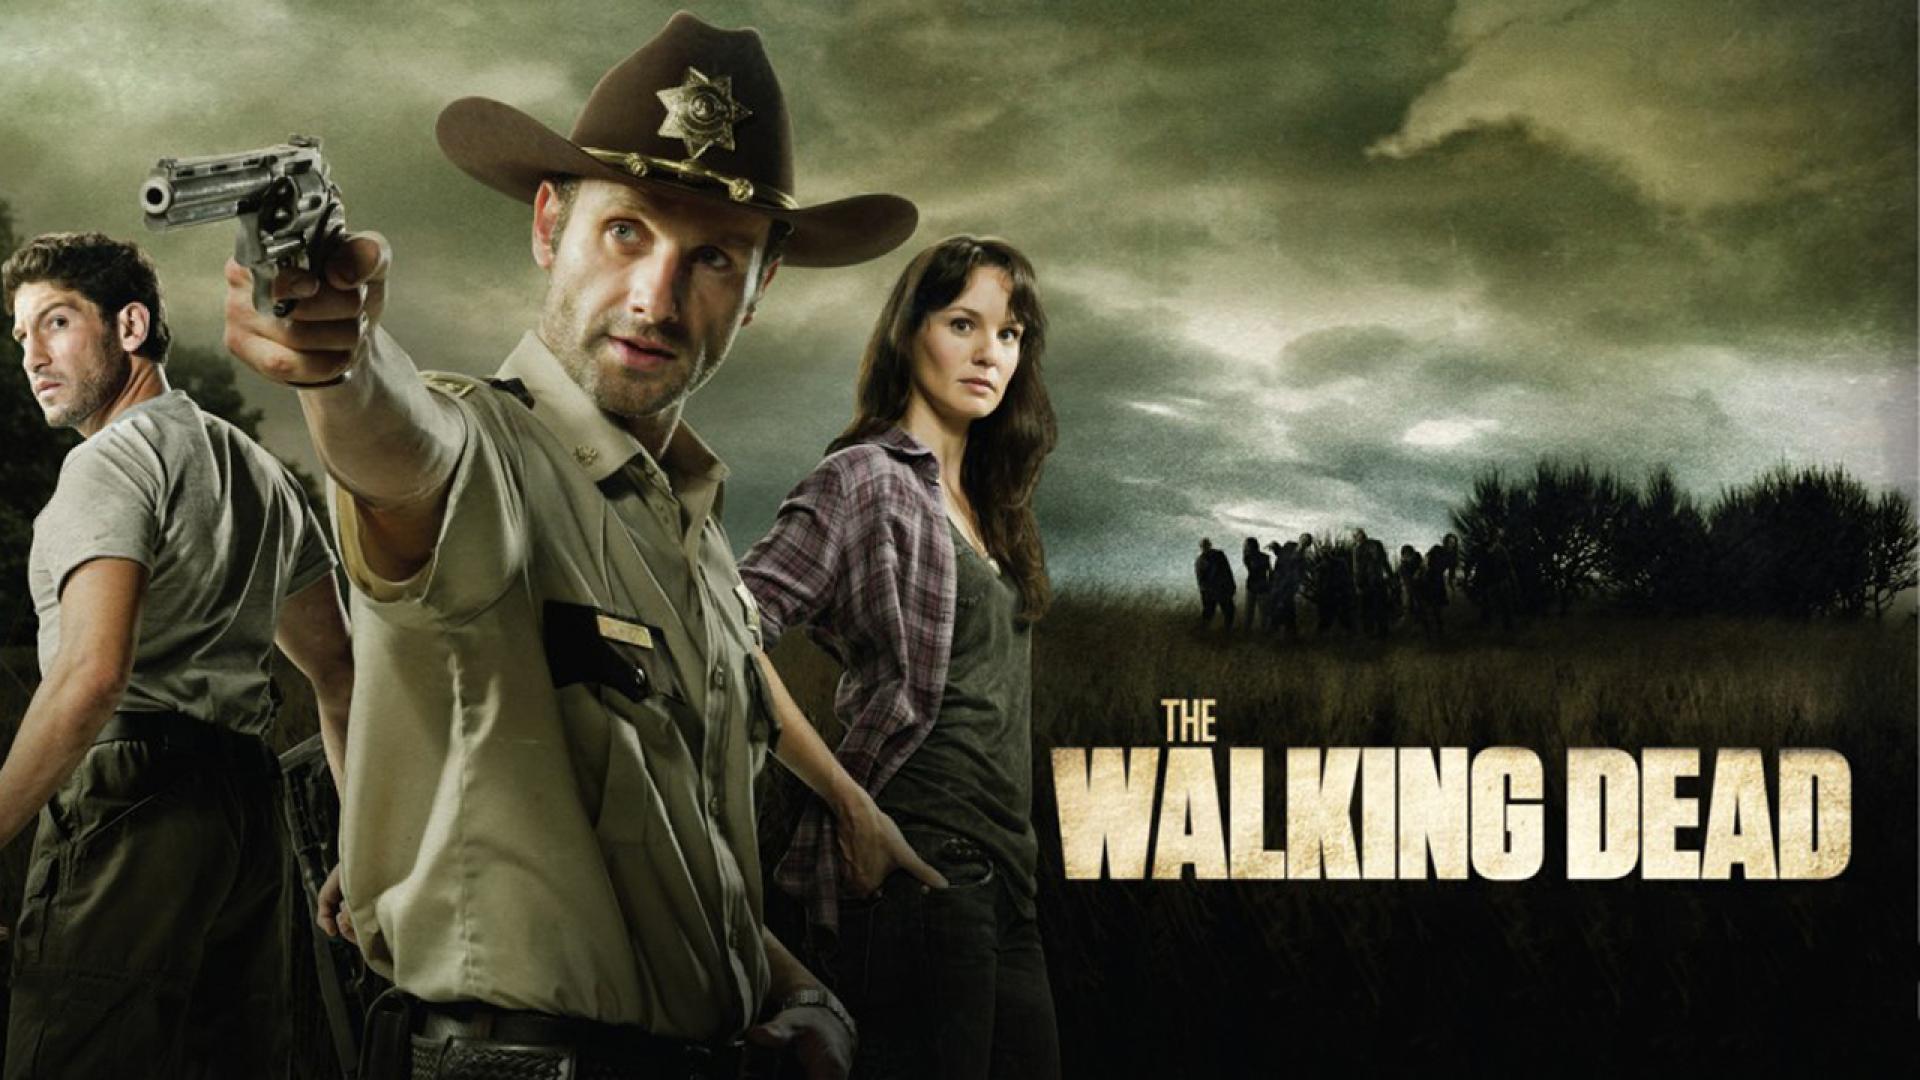 The Walking Dead Wallpaper (67+ images)